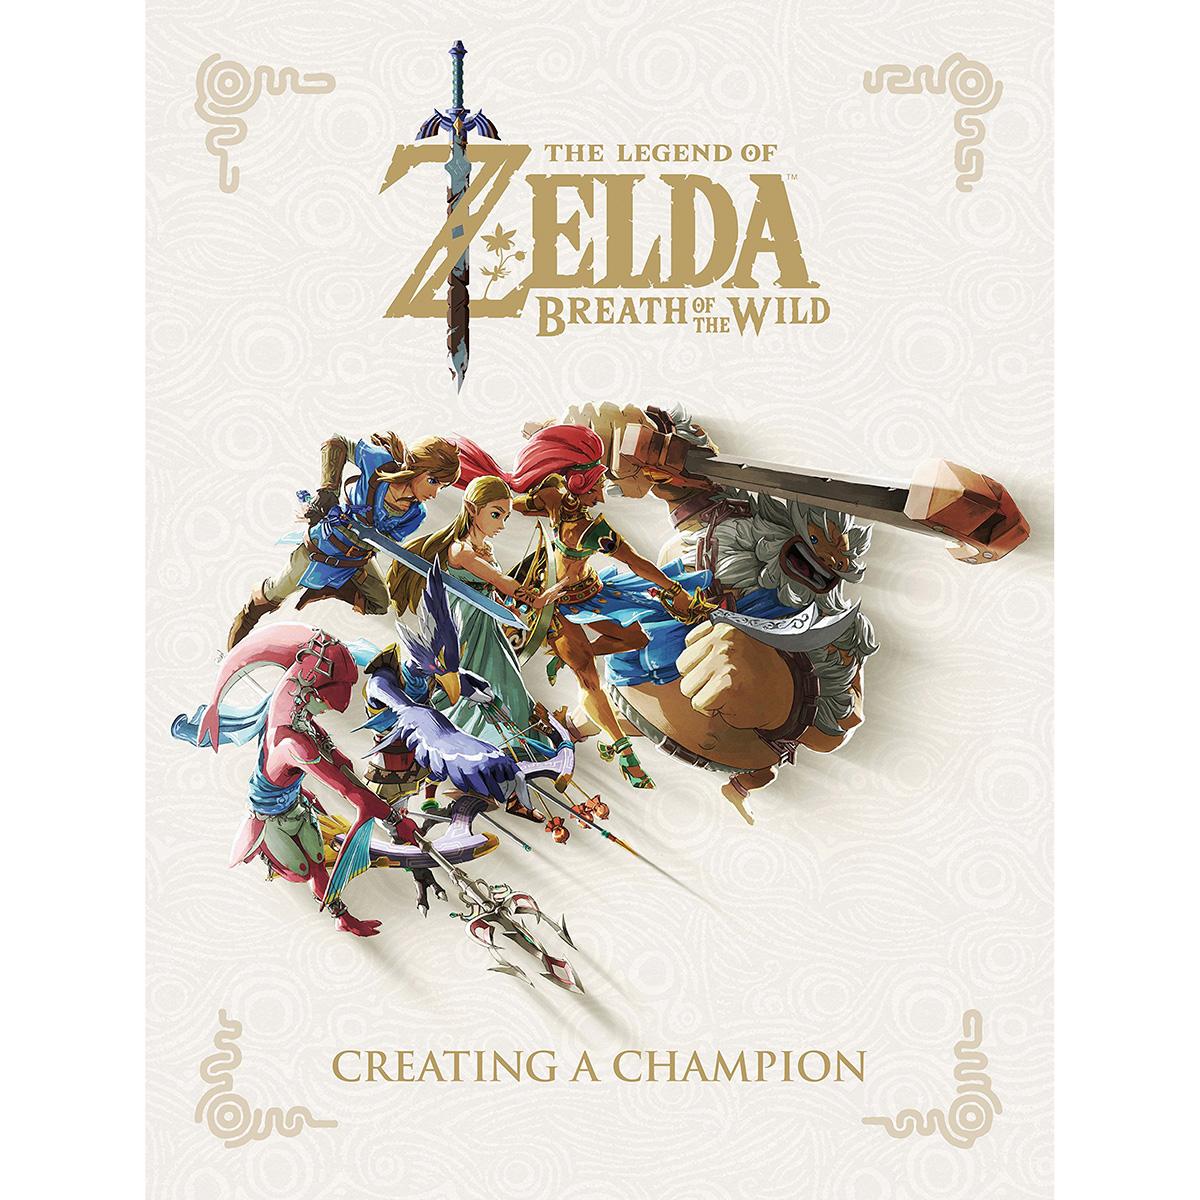 The Legend of Zelda Creating a Champion Book for $15.32